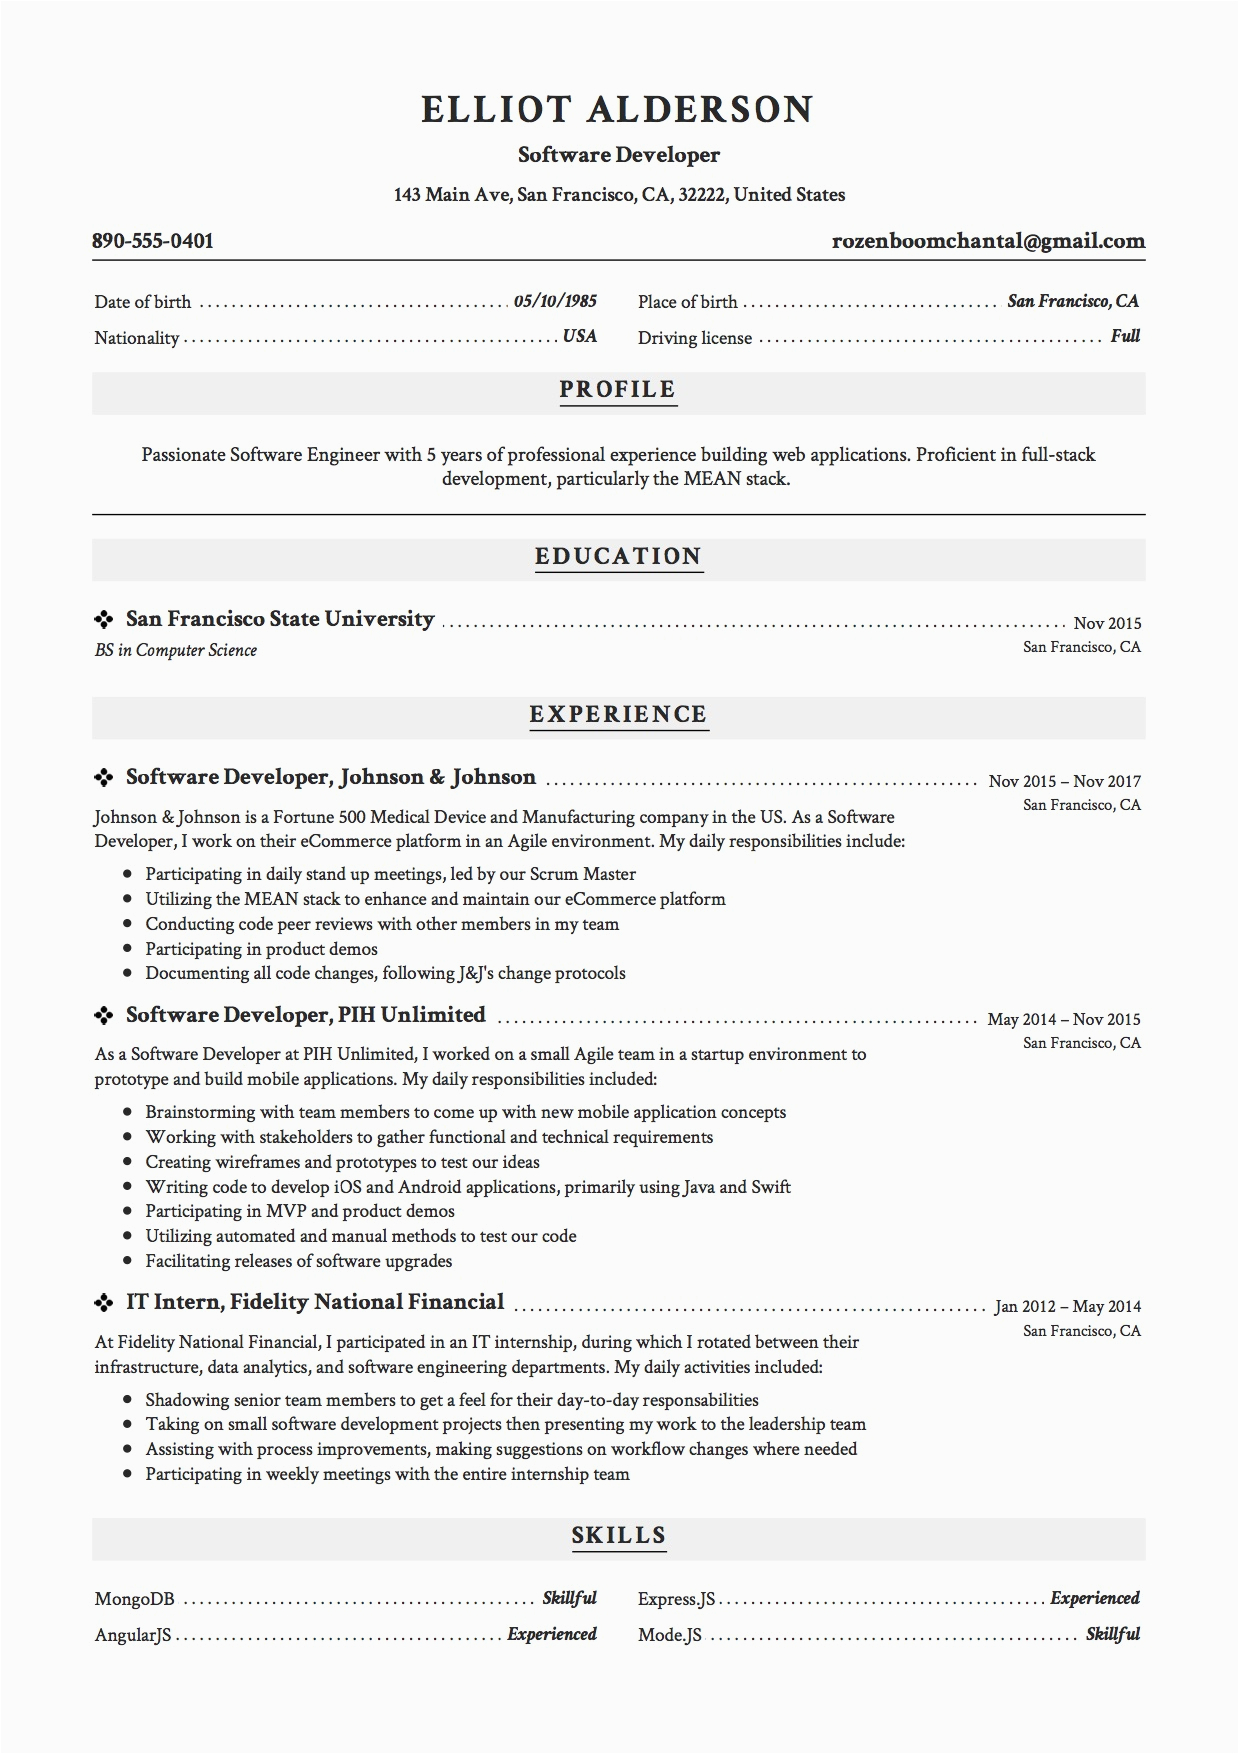 Sample Resume for One Year Experienced software Engineer Sample Resume for software Engineer with 3 Years